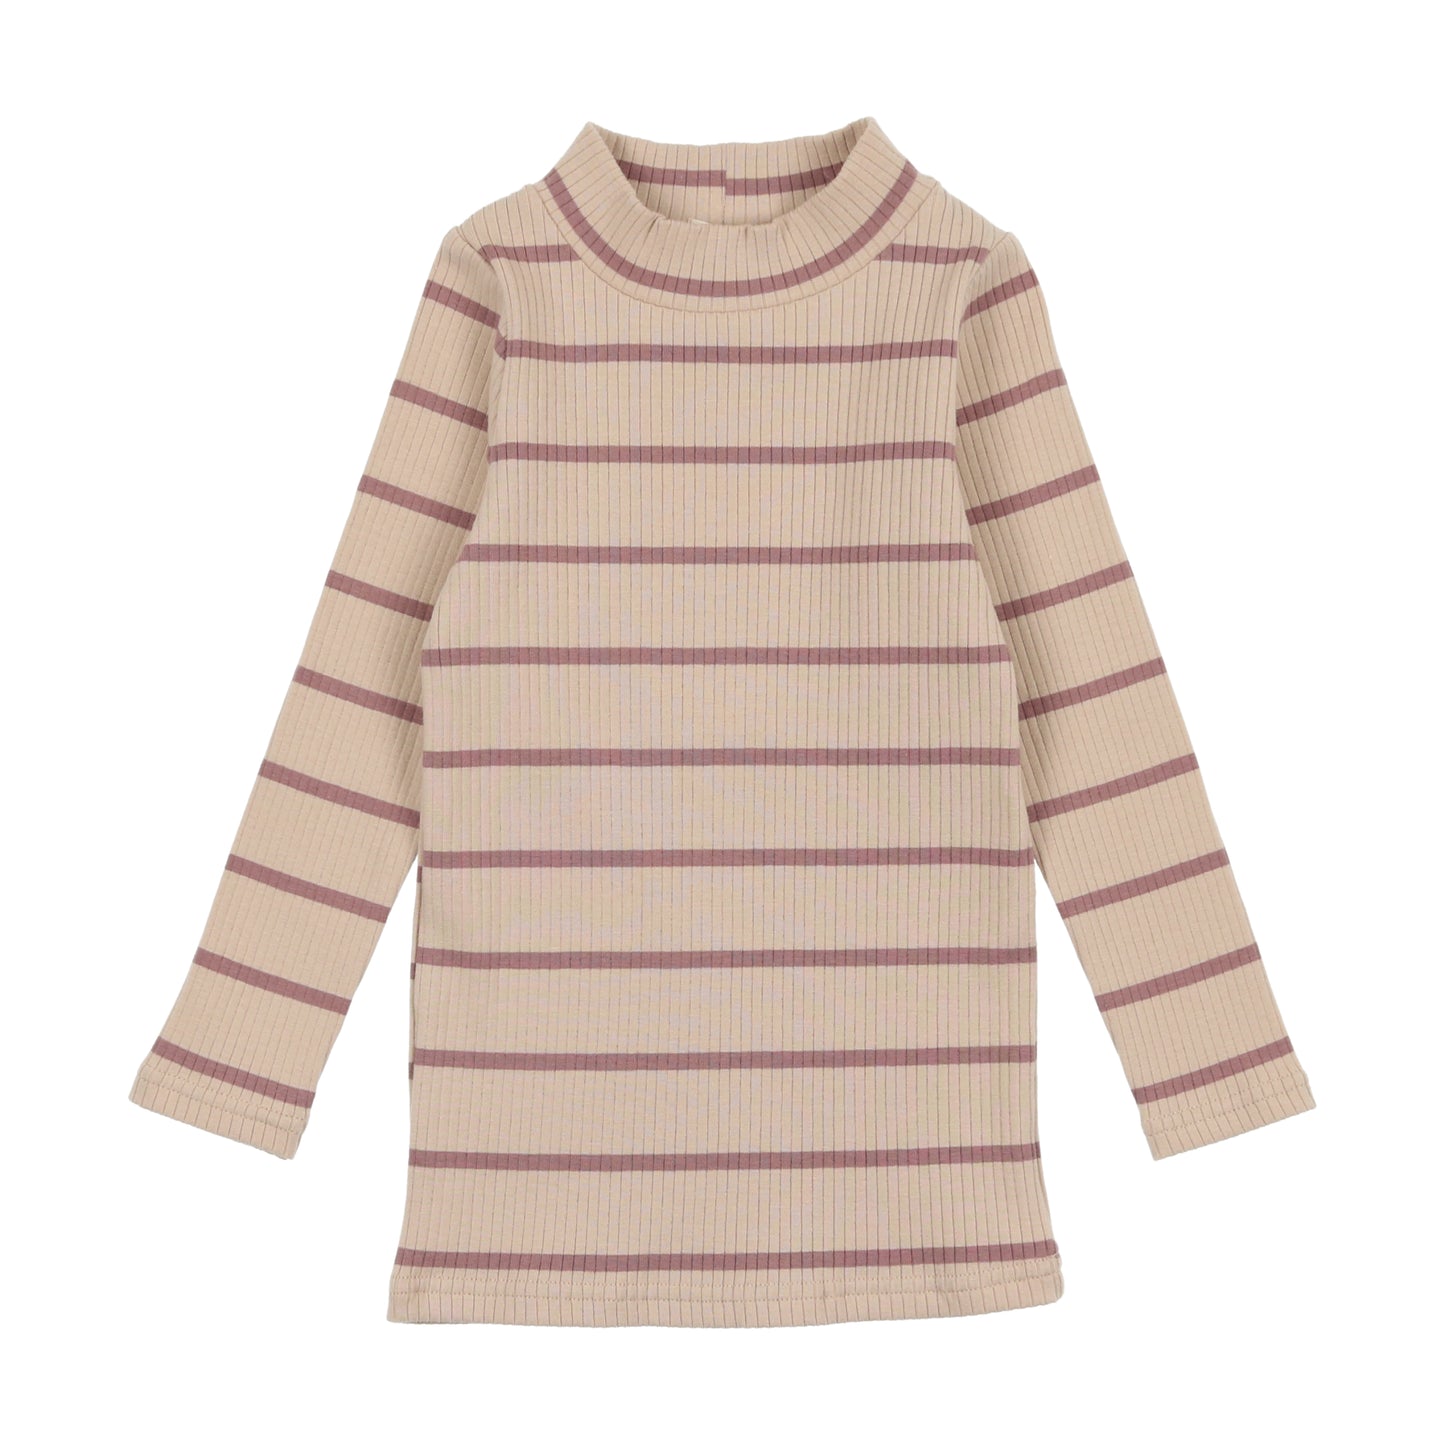 Lil Legs Ribbed/Striped Mock Neck